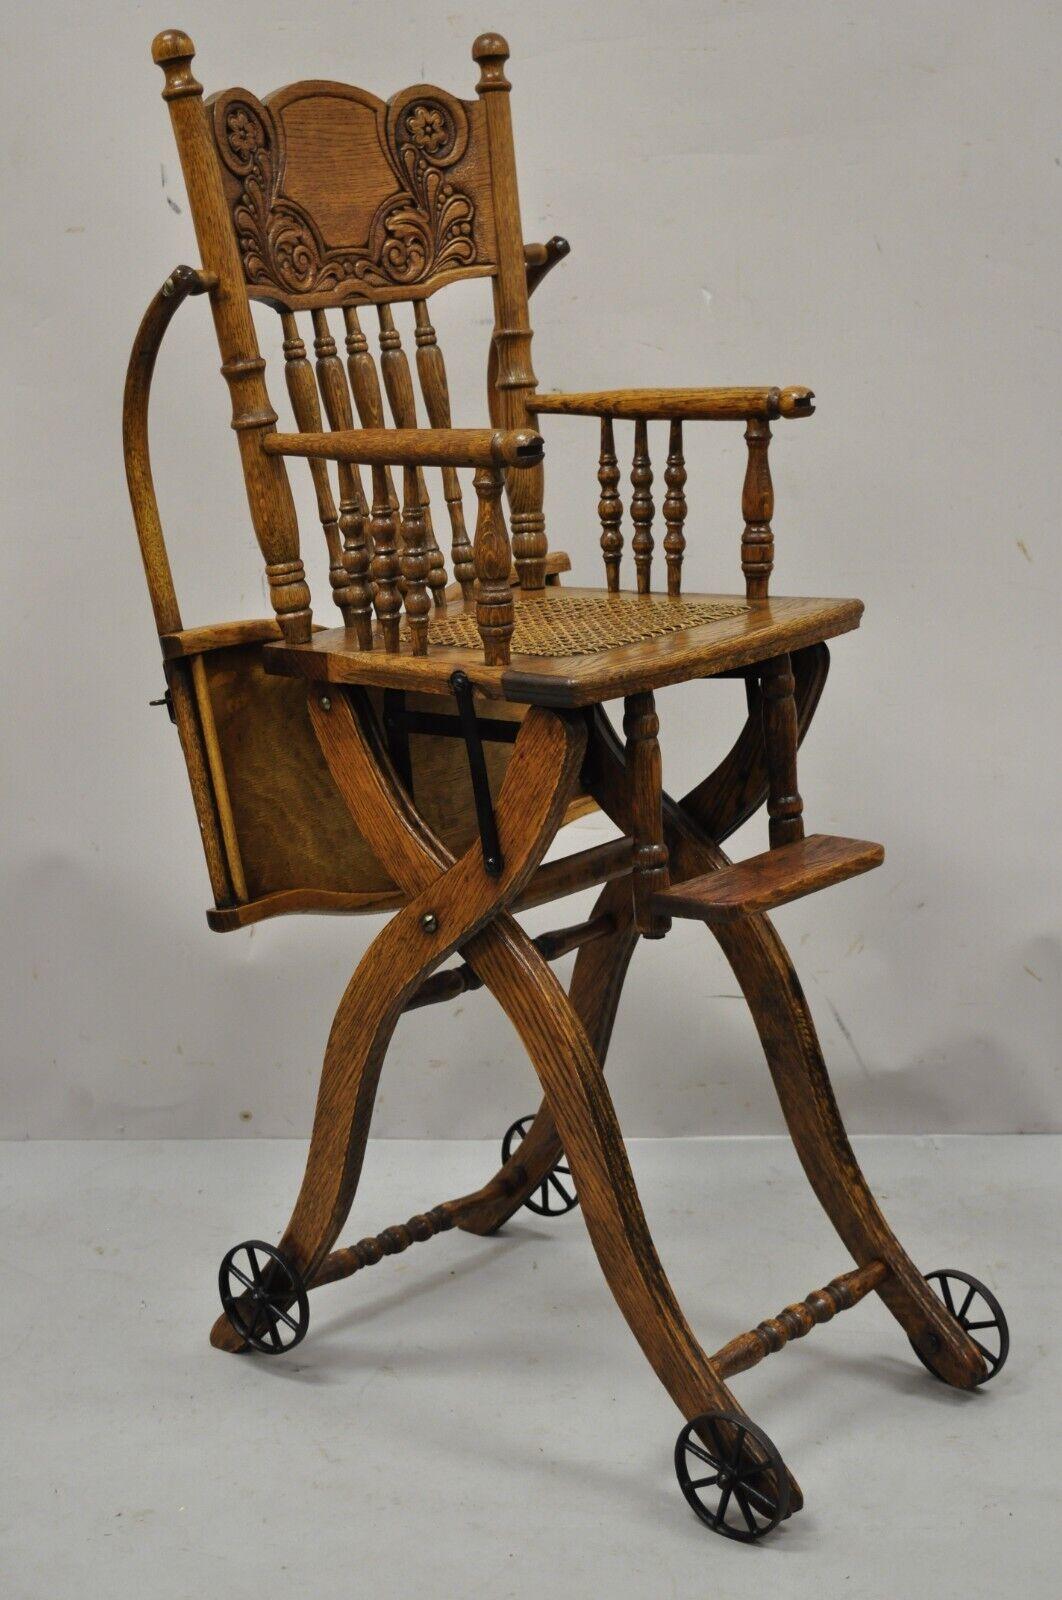 Antique Victorian Oak Wood Convertible Combination Baby High Chair Stroller. Item features cast iron hardware, cane seat, iron rolling wheels, carved pressed back, very nice antique item, adjustable form from high chair to low rolling play chair.